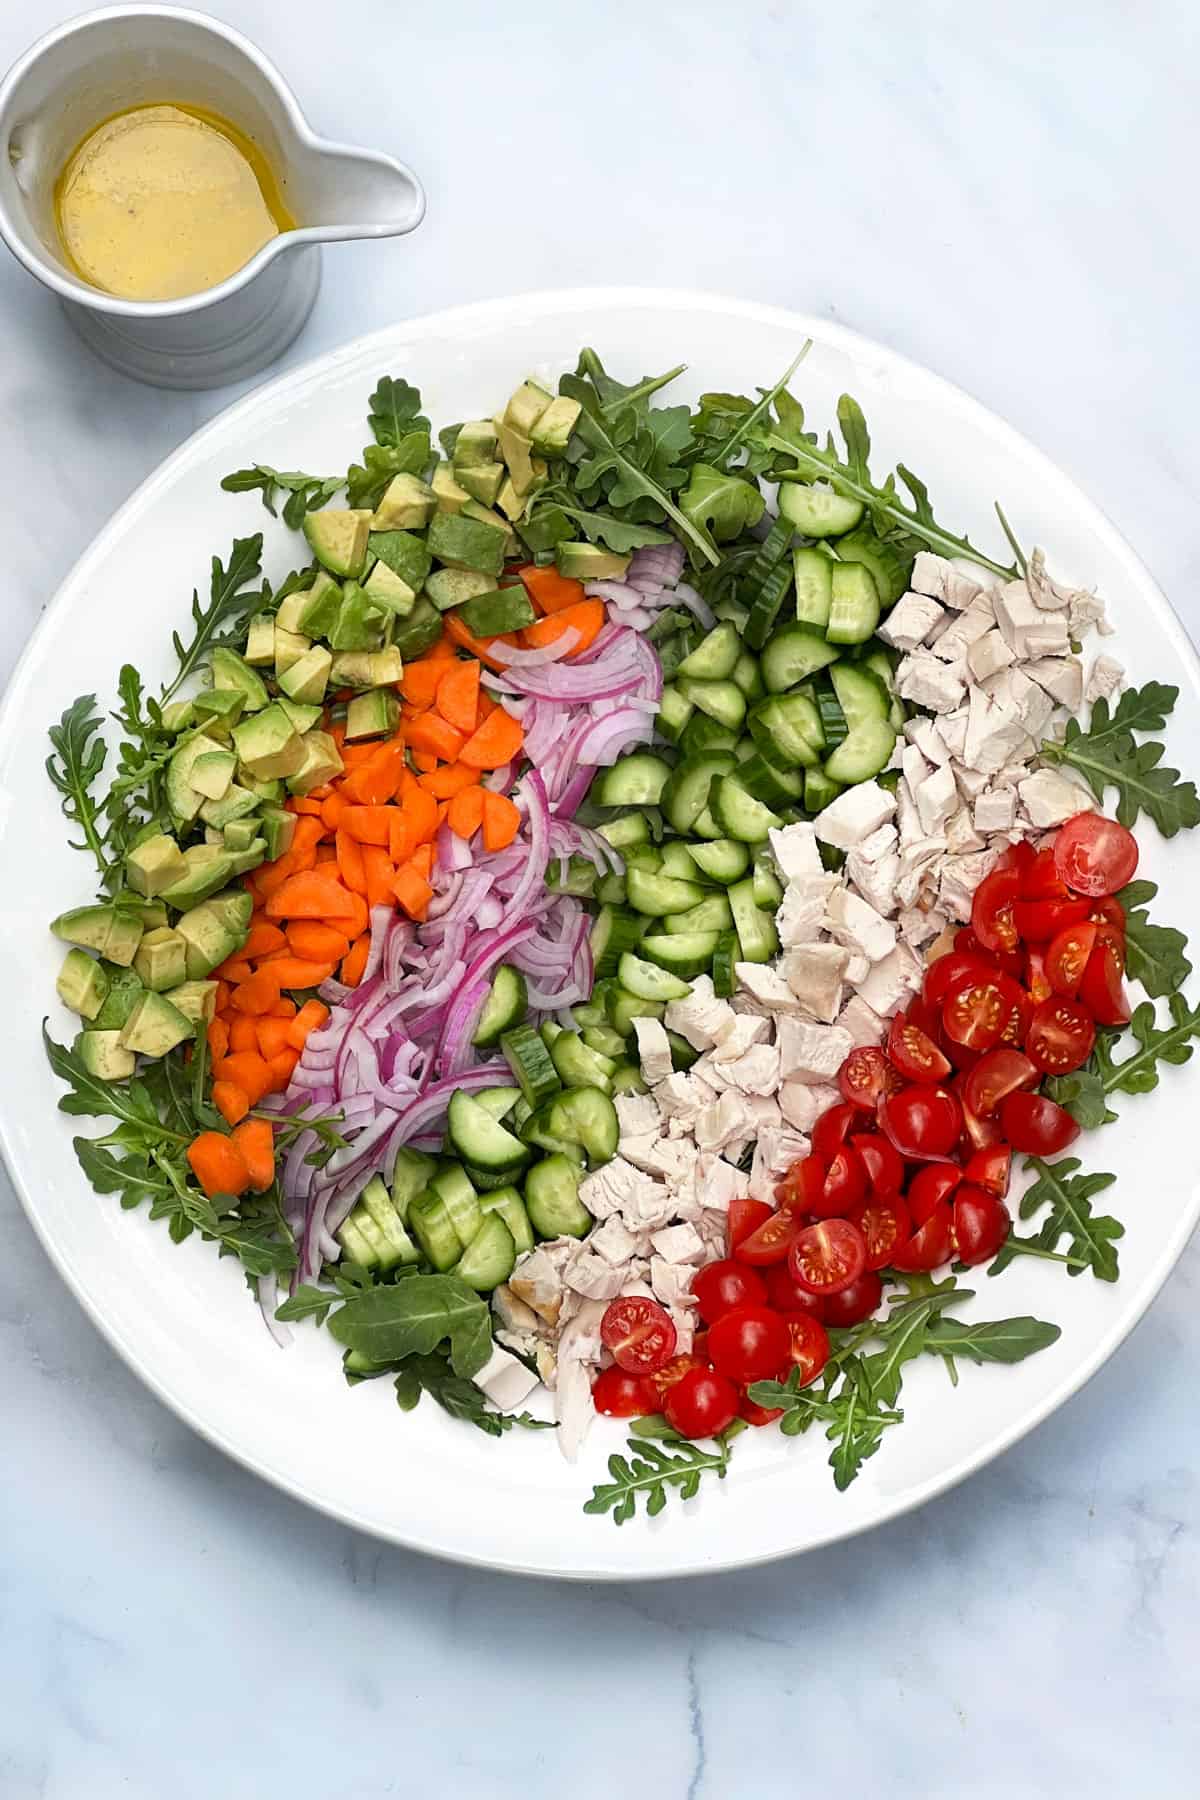 A rainbow of diced ingredients lined up in a large serving bowl, avocados, carrots, red onions, cucumbers, chicken, and cherry tomatoes. A pitcher of lemon dijon vinaigrette to the side.